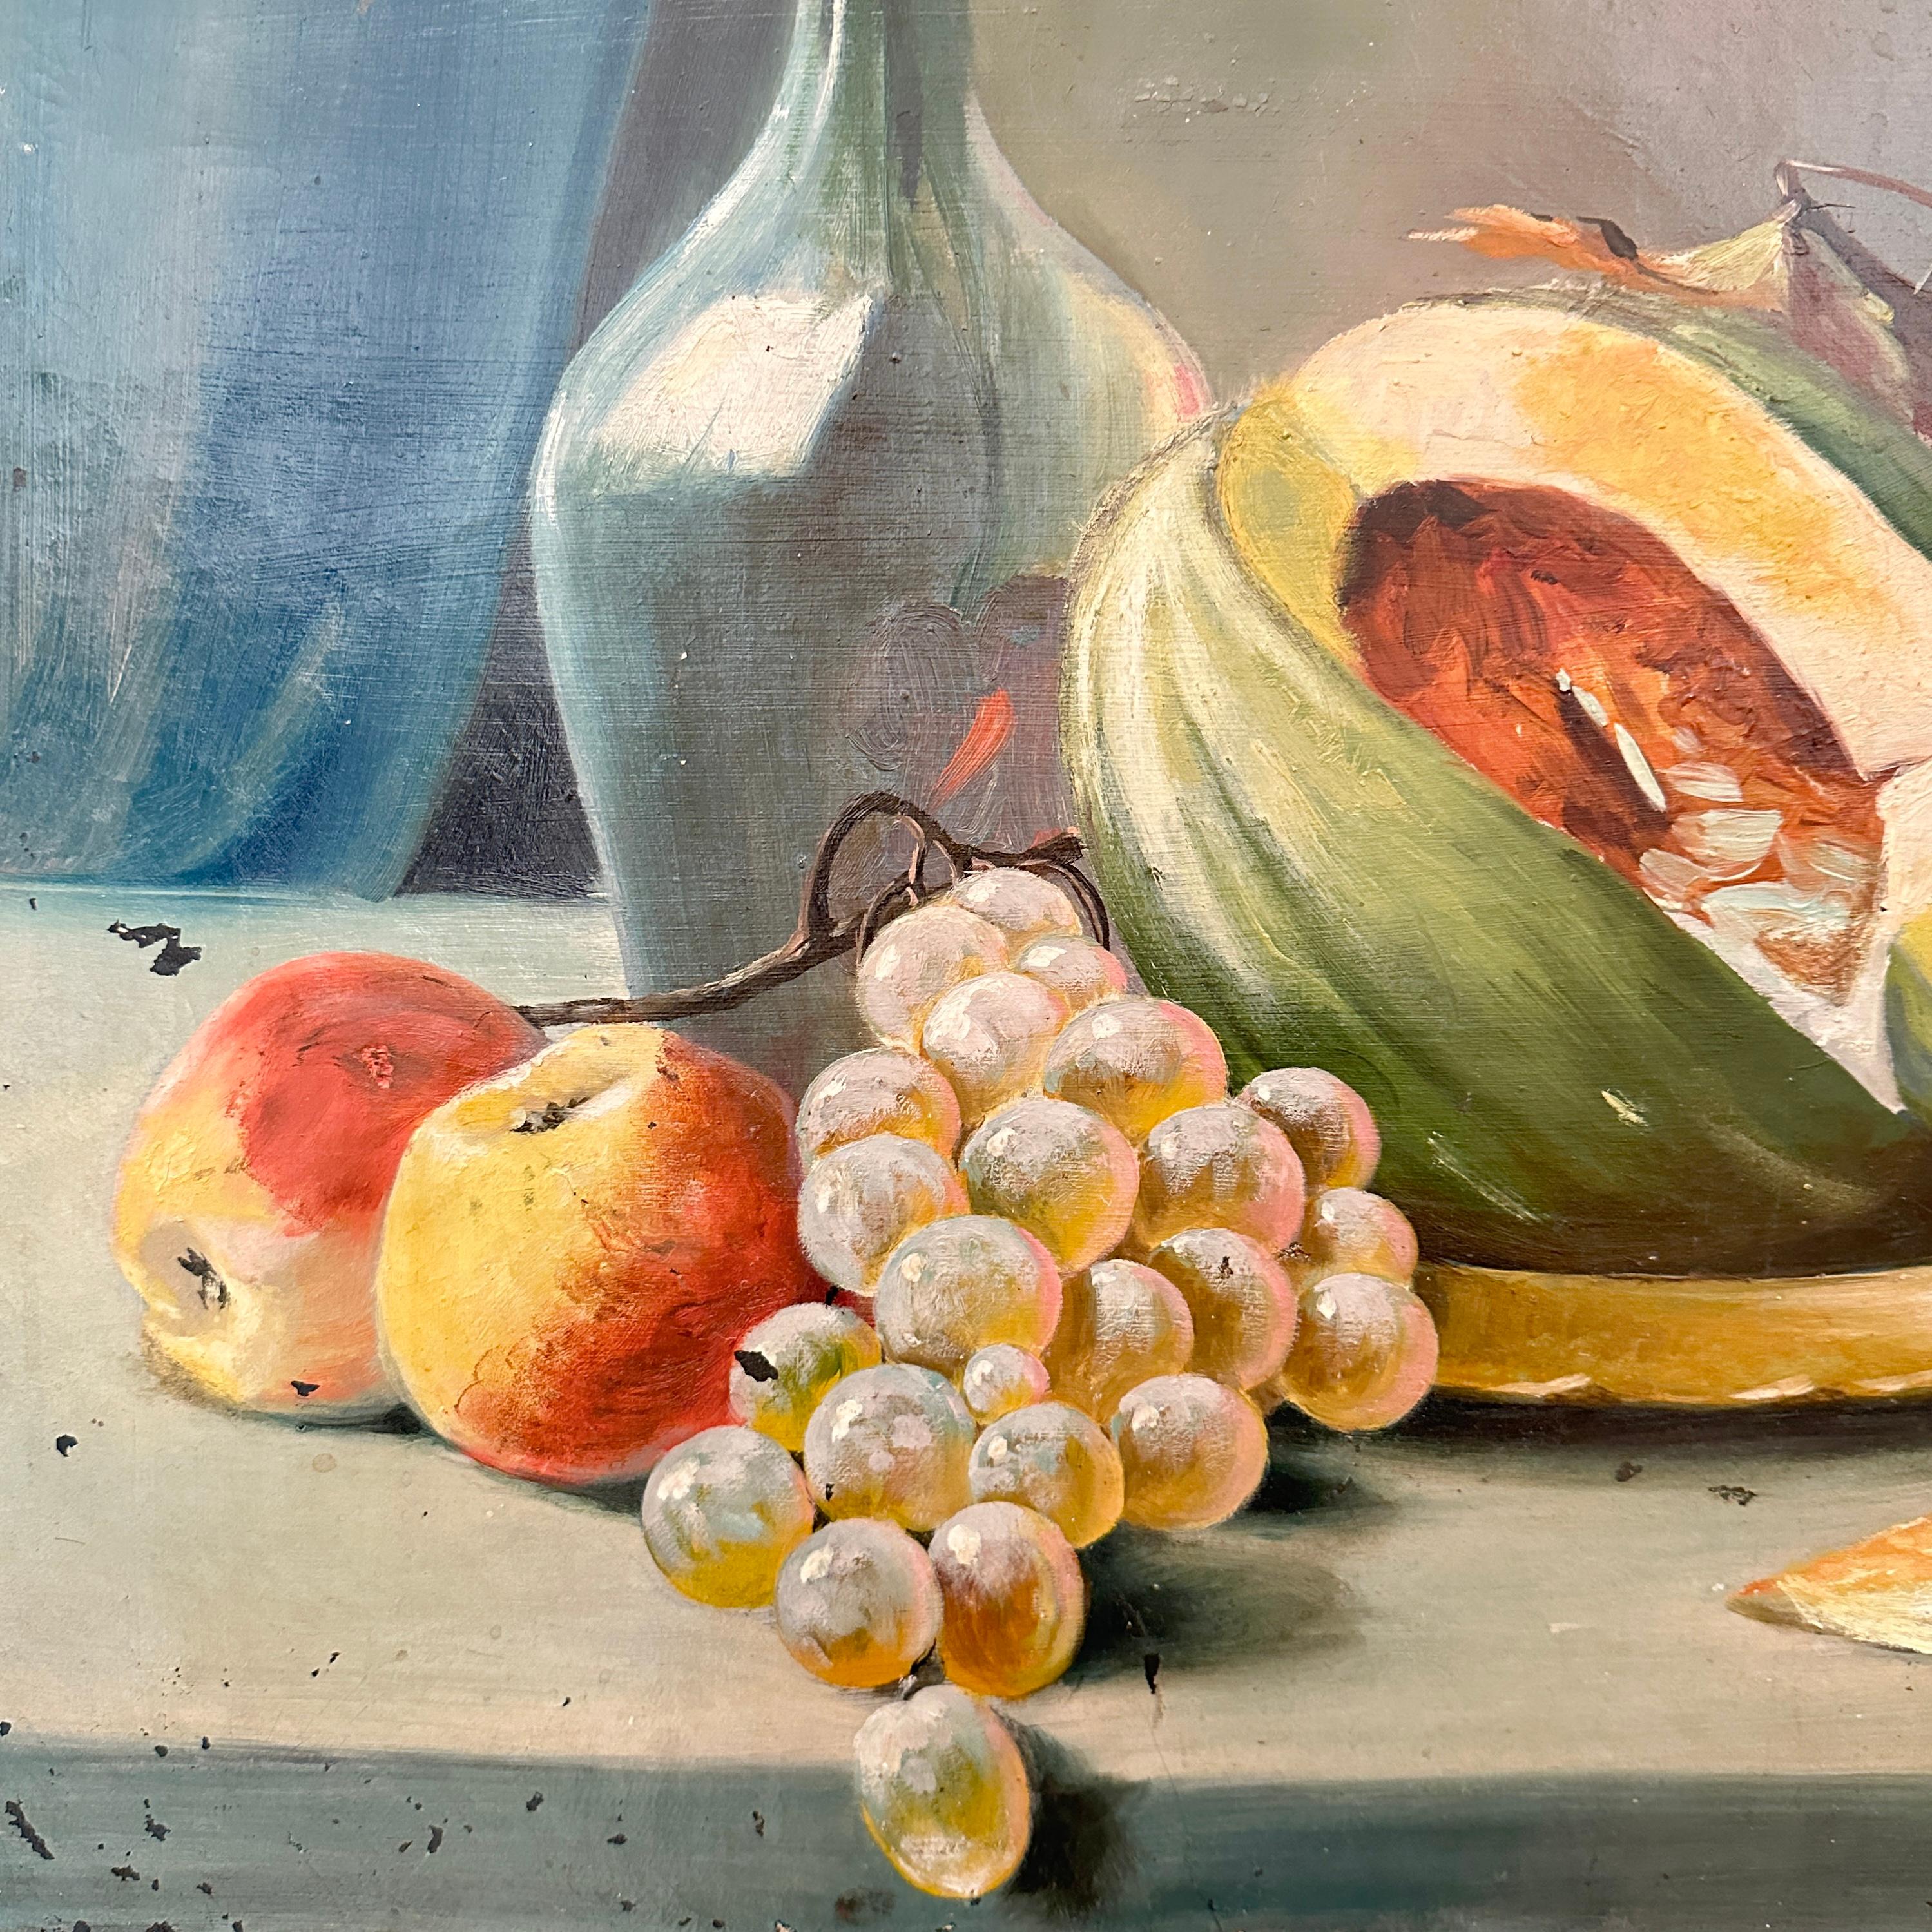 This beautiful Early 19th Biedermeier Still-Life Oil Painting was painted around 1820.
It remains it original fantastic condition and shows a table scenery with Flowers and Fruits. A great painting!
A unique piece which is a great eye-catcher for